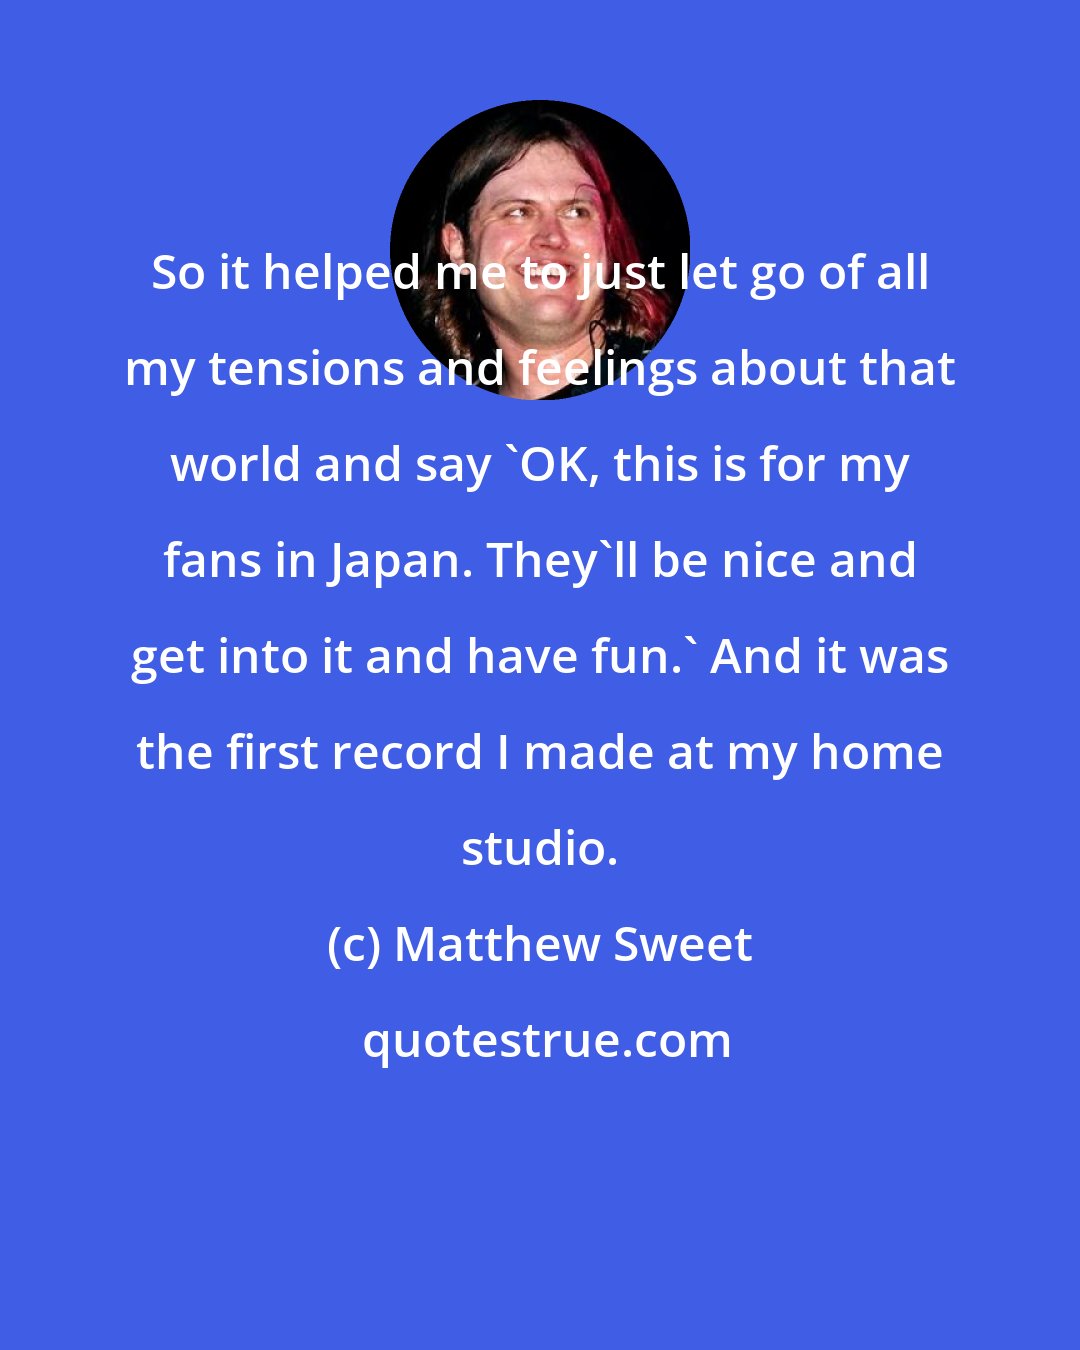 Matthew Sweet: So it helped me to just let go of all my tensions and feelings about that world and say 'OK, this is for my fans in Japan. They'll be nice and get into it and have fun.' And it was the first record I made at my home studio.